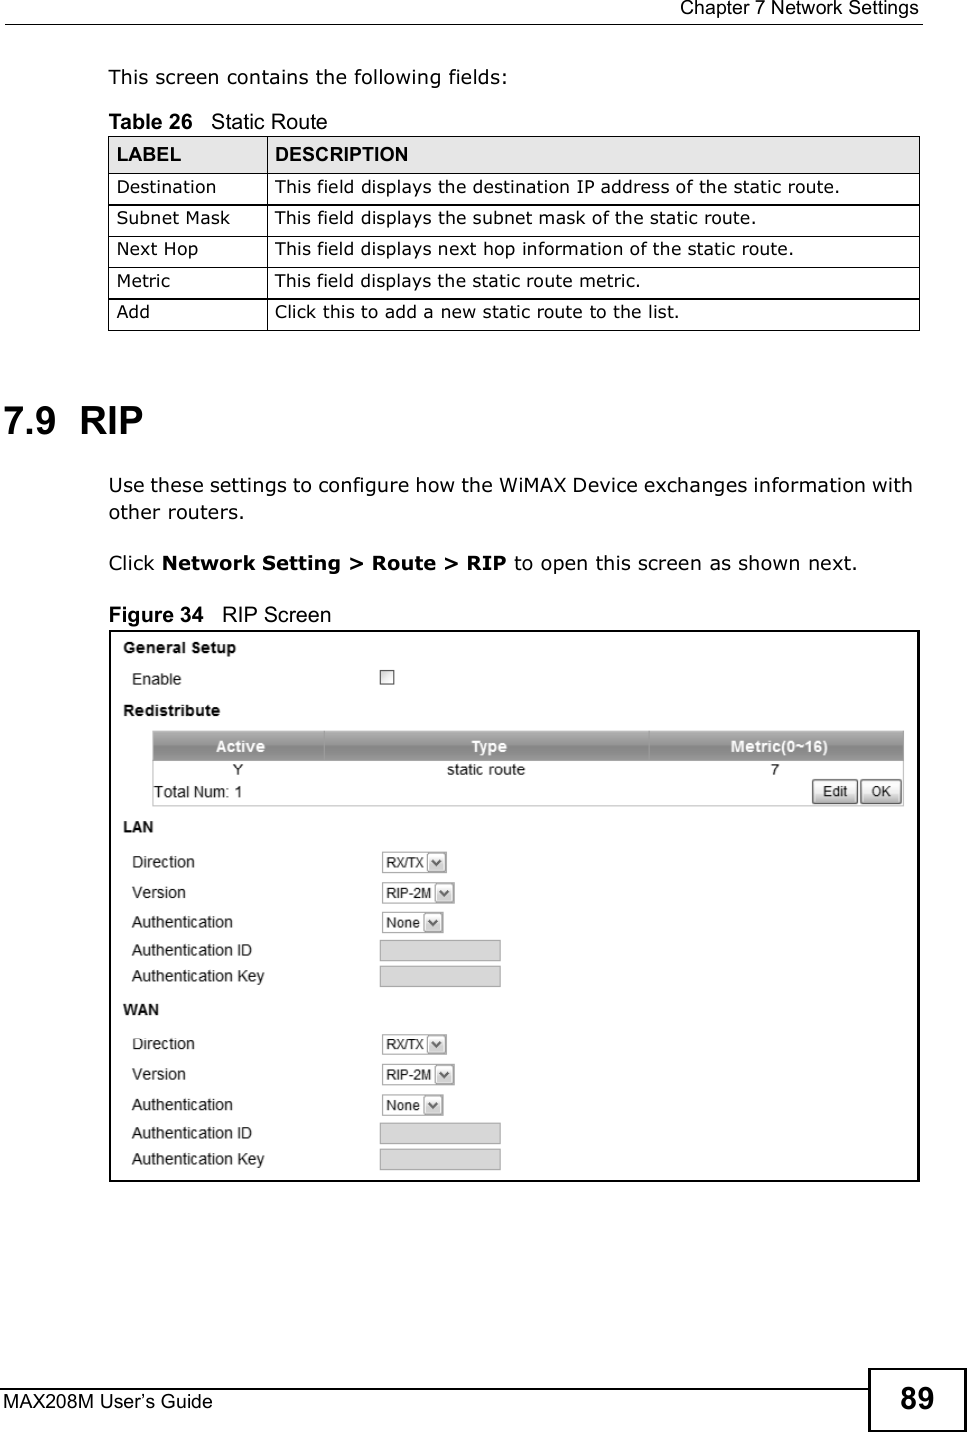  Chapter 7Network SettingsMAX208M User s Guide 89This screen contains the following fields:7.9  RIPUse these settings to configure how the WiMAX Device exchanges information with other routers.Click Network Setting &gt; Route &gt; RIP to open this screen as shown next.Figure 34   RIP ScreenTable 26   Static RouteLABEL DESCRIPTIONDestinationThis field displays the destination IP address of the static route.Subnet MaskThis field displays the subnet mask of the static route.Next HopThis field displays next hop information of the static route.MetricThis field displays the static route metric.AddClick this to add a new static route to the list.